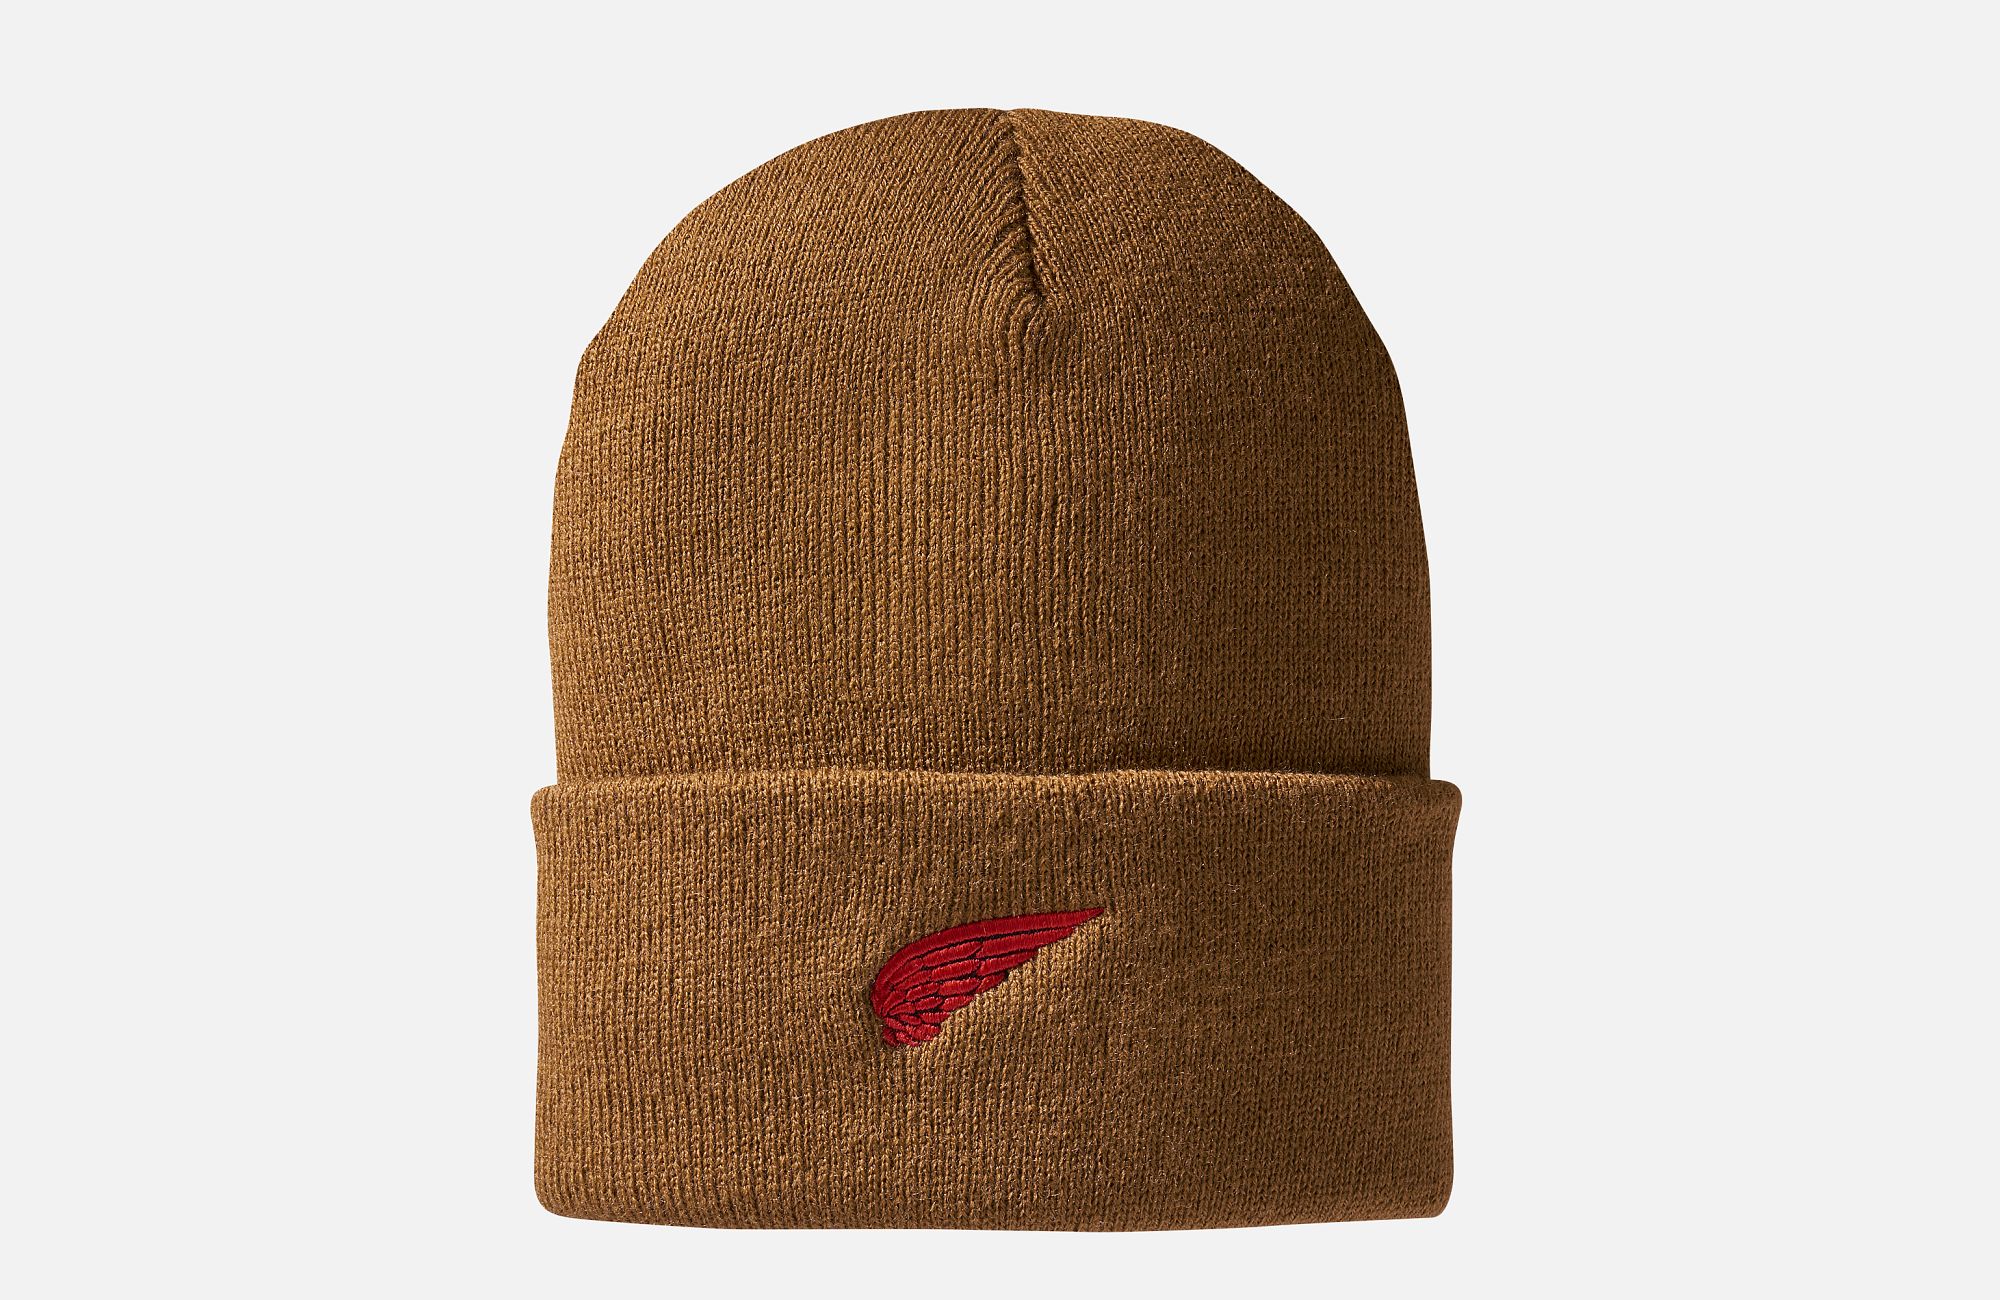 Wing Logo Knit Beanie Hat image number 0